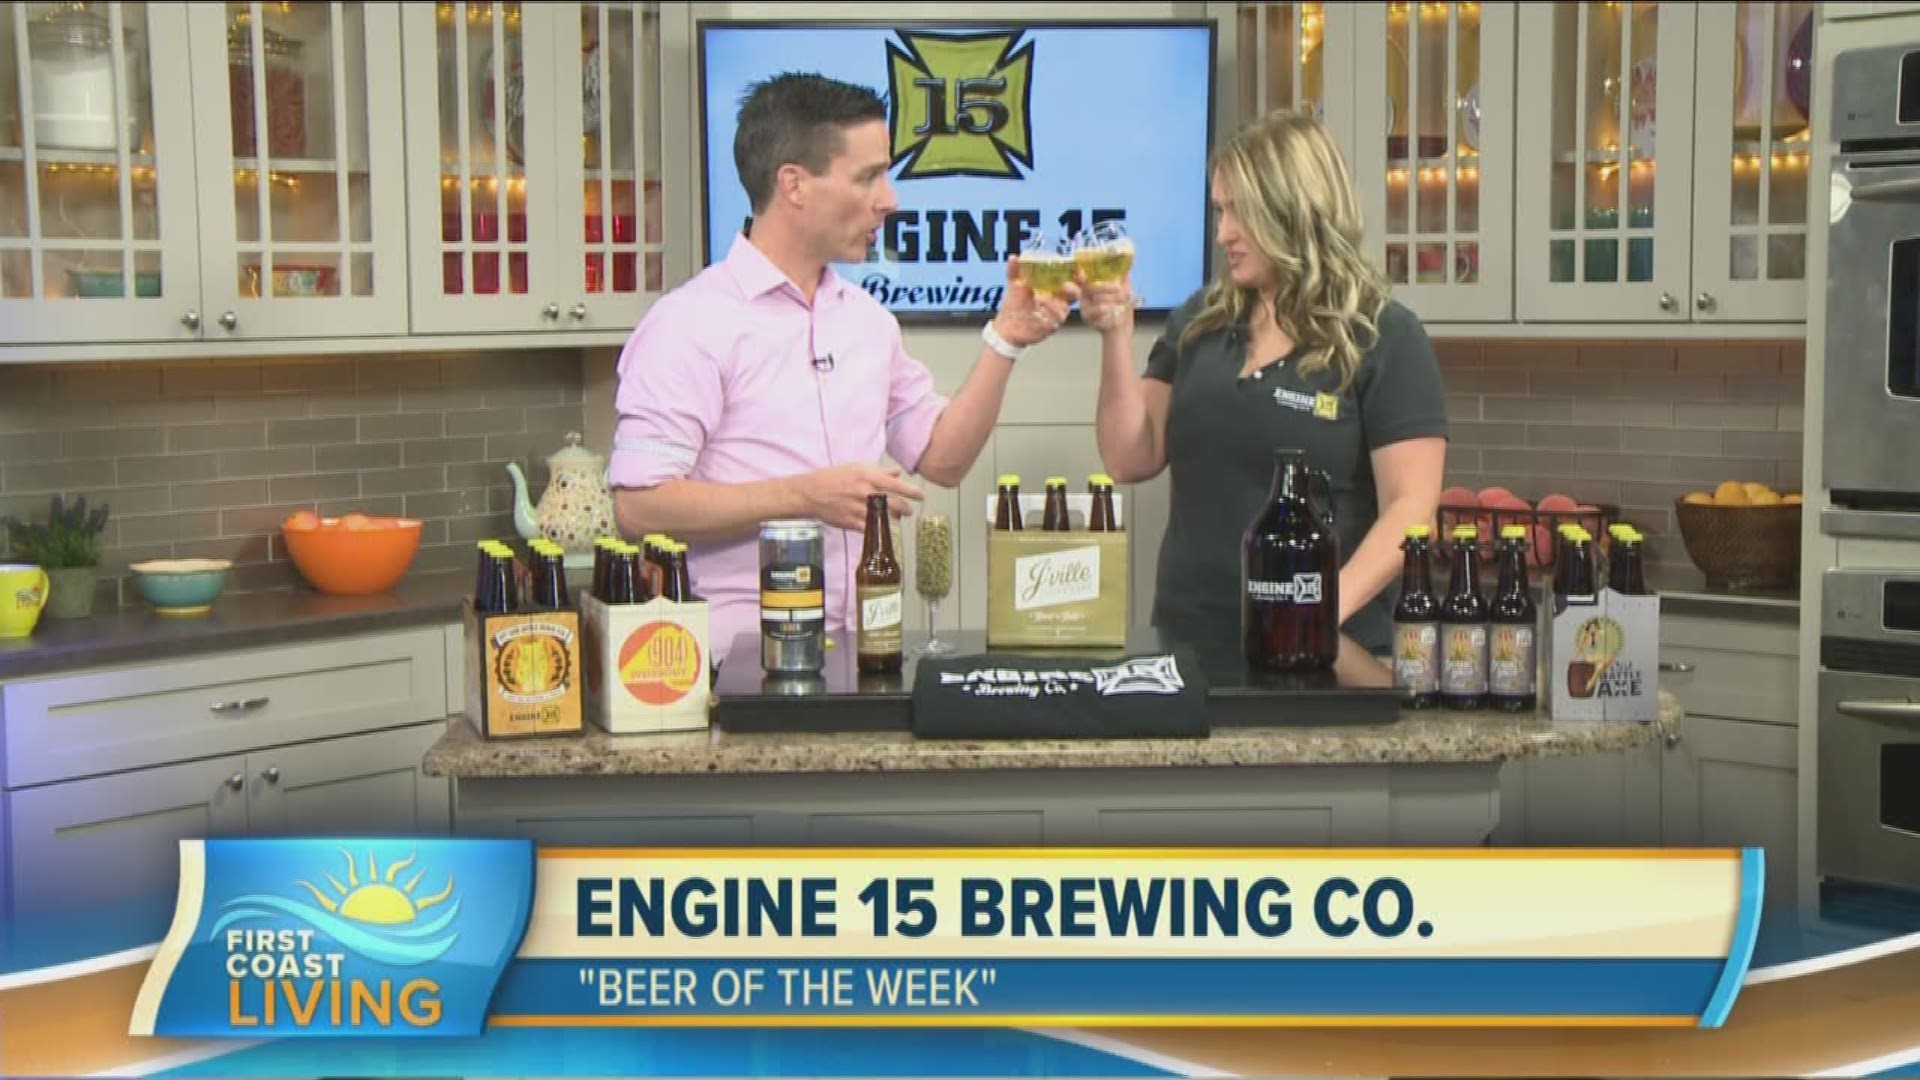 Engine 15 Brewing Company stops by to serve up this week's pick of Beer of the Week. Curtis Dvorak gets a sample of a lager that makes for a great starter craft beer.